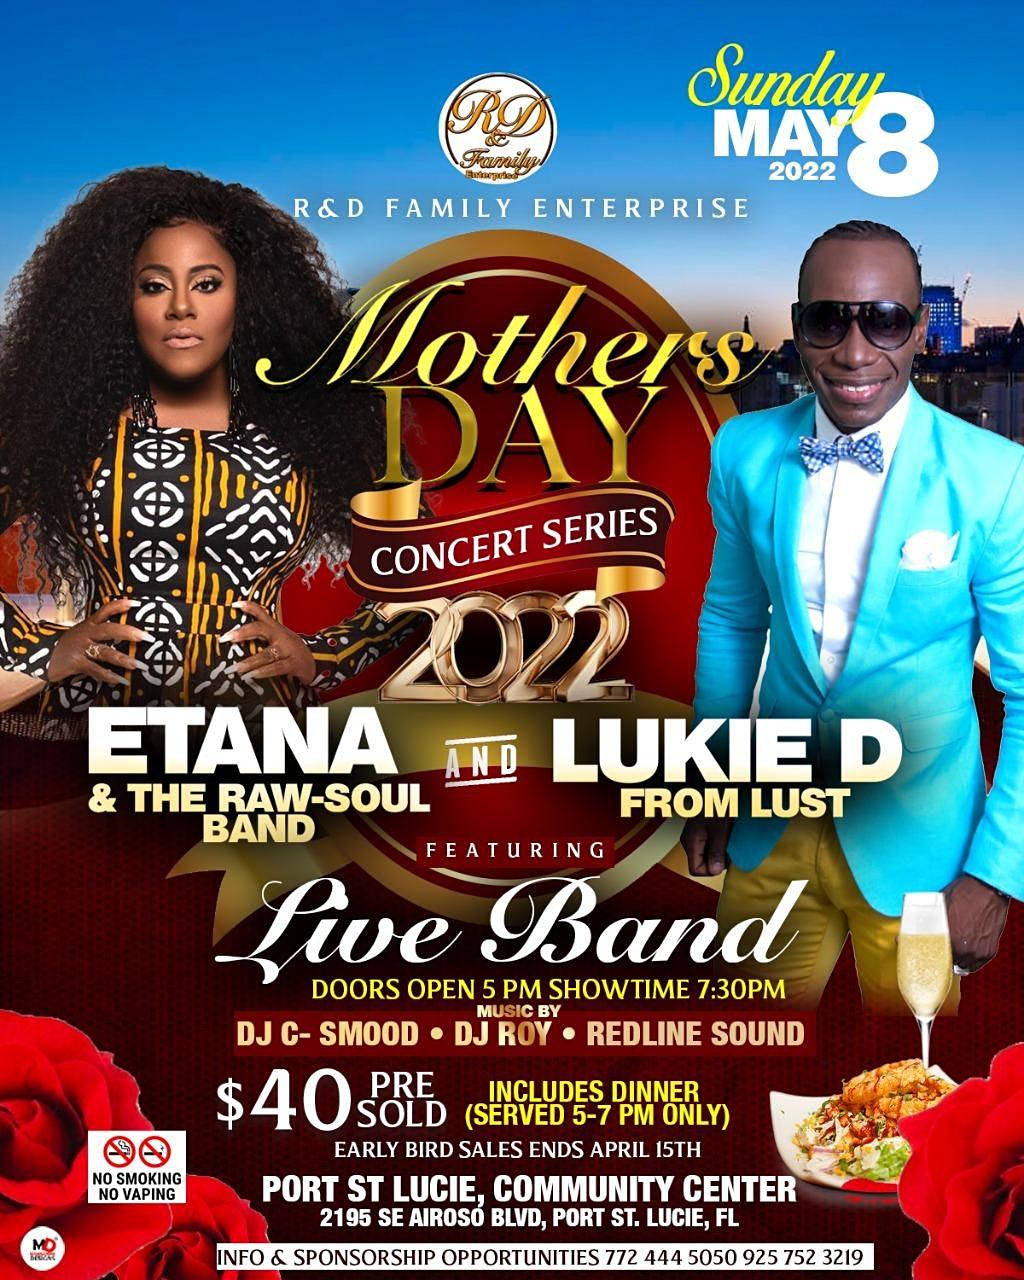 R&D Family Ent Presents Our Annual Mother's Day Concert Series at Port St. Lucie